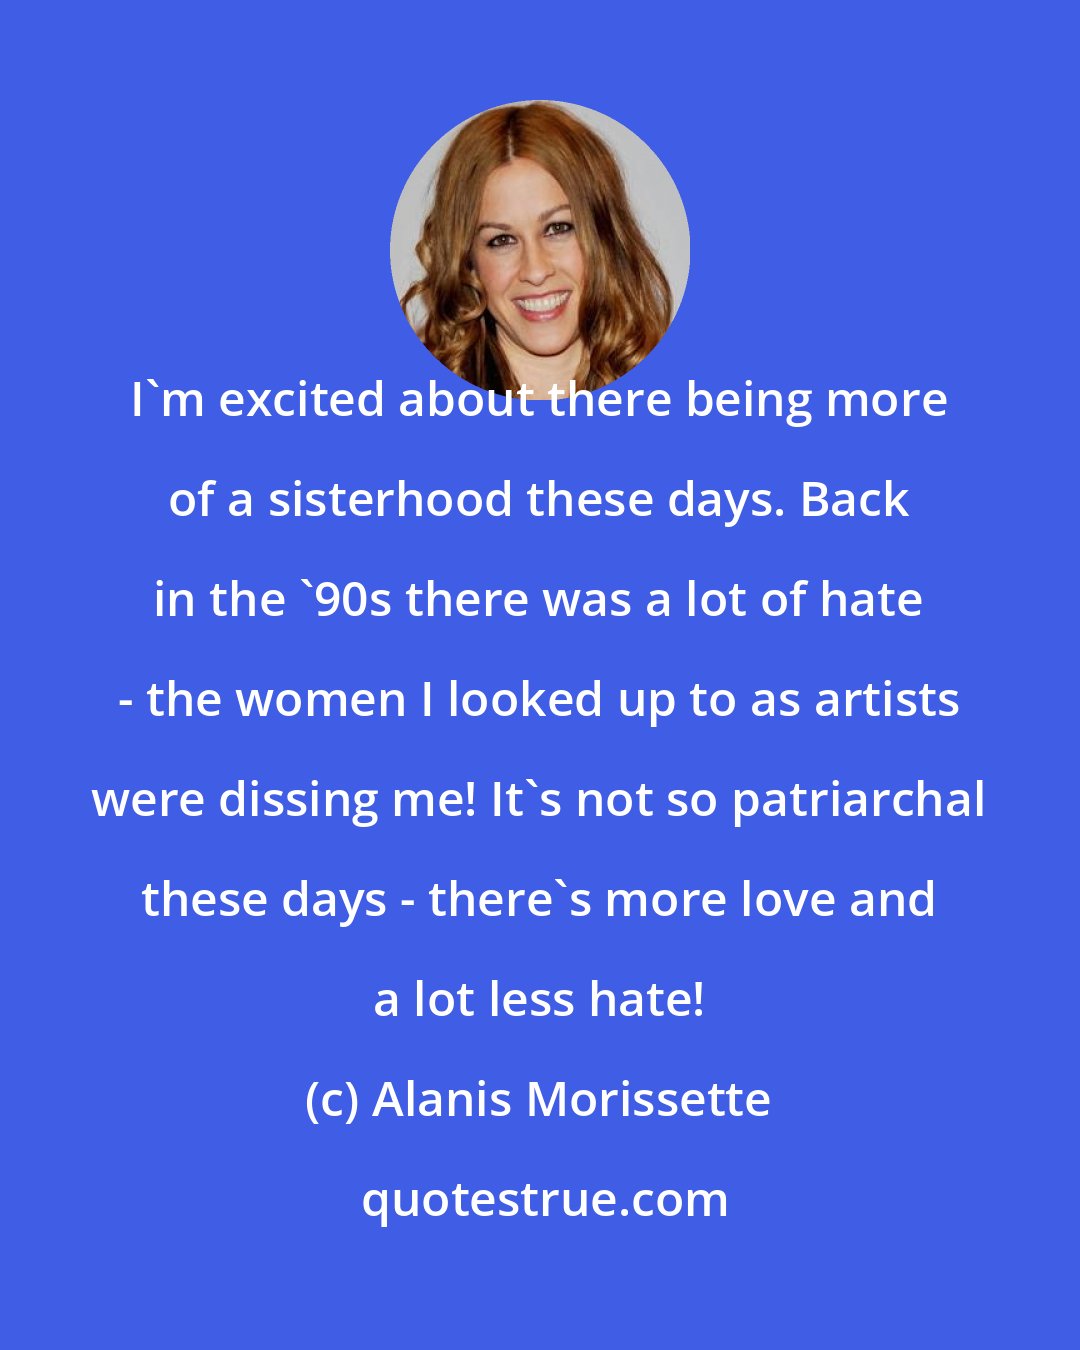 Alanis Morissette: I'm excited about there being more of a sisterhood these days. Back in the '90s there was a lot of hate - the women I looked up to as artists were dissing me! It's not so patriarchal these days - there's more love and a lot less hate!